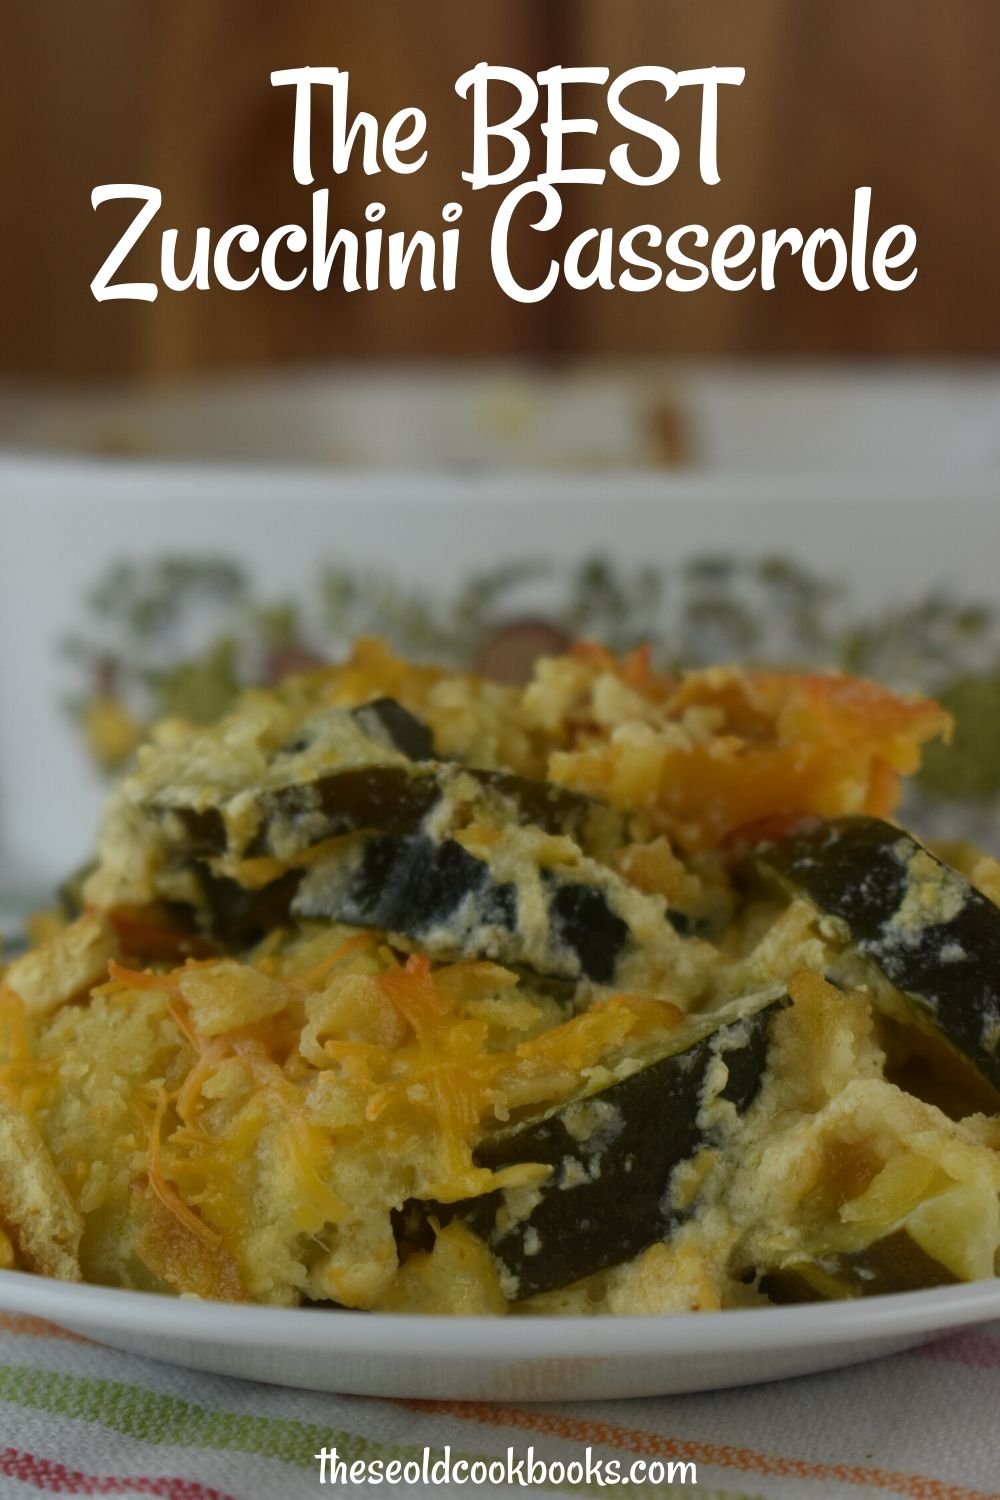 Sour Cream Zucchini Casserole is an easy side dish that combines a creamy, cheesy zucchini base with a crunchy Ritz cracker topping.